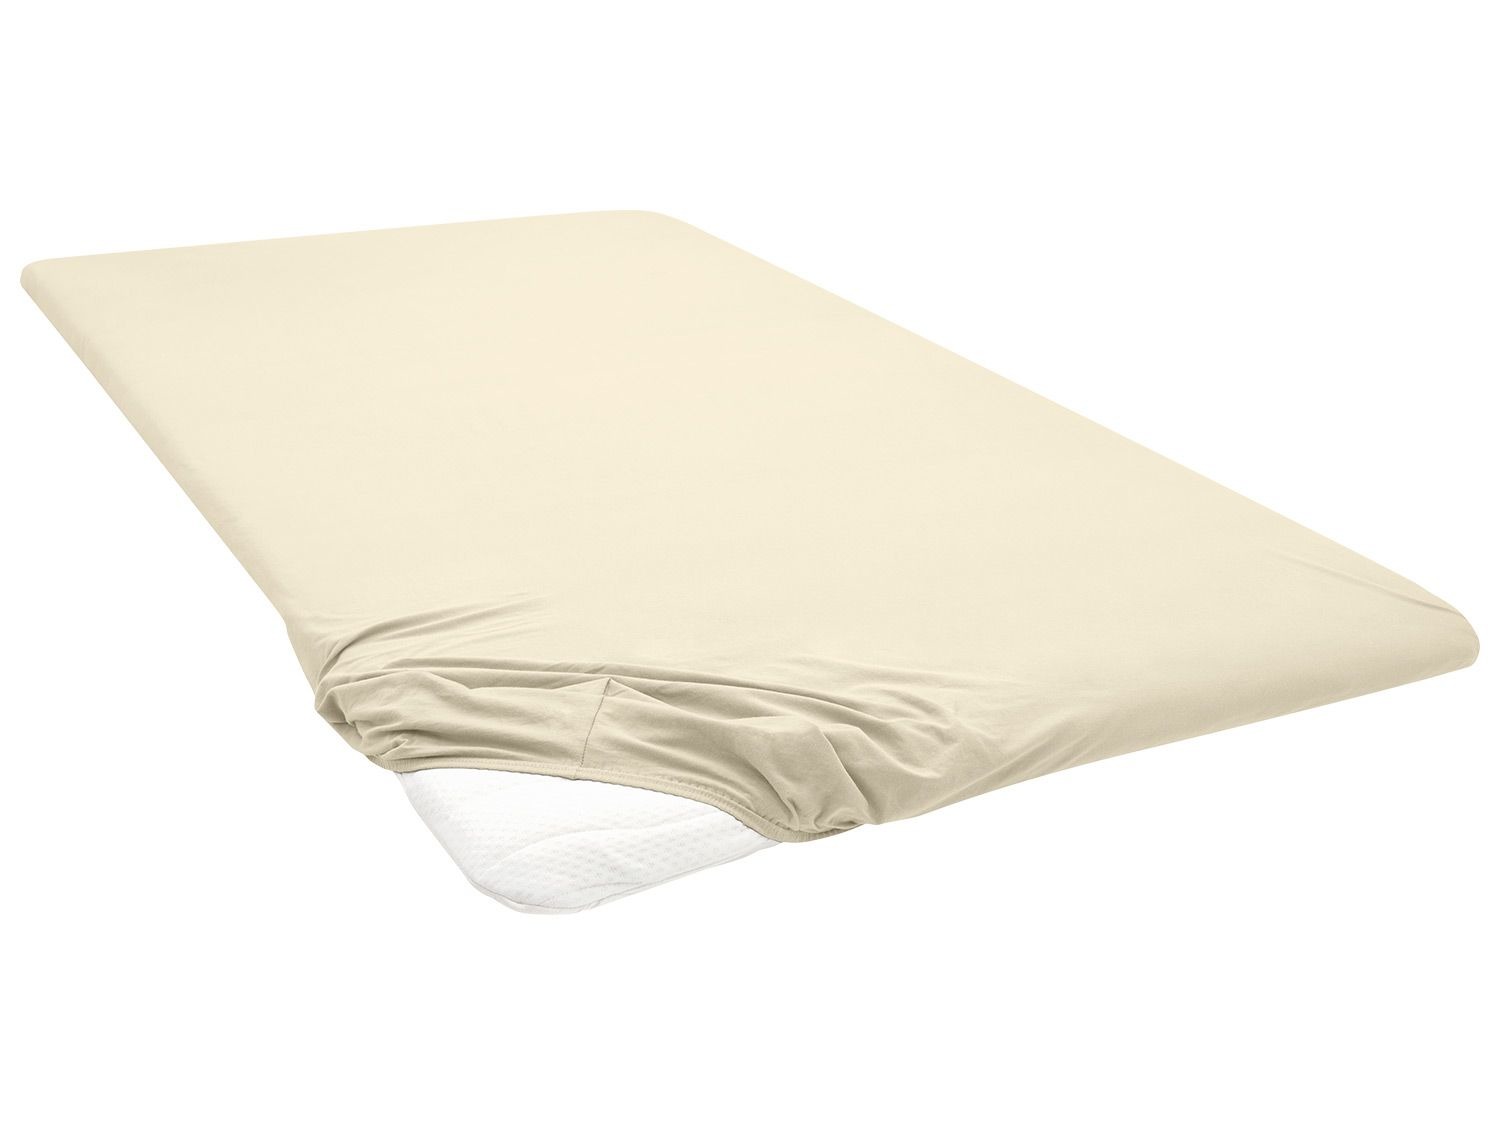 Jersey topdekmatras | Lidl.be